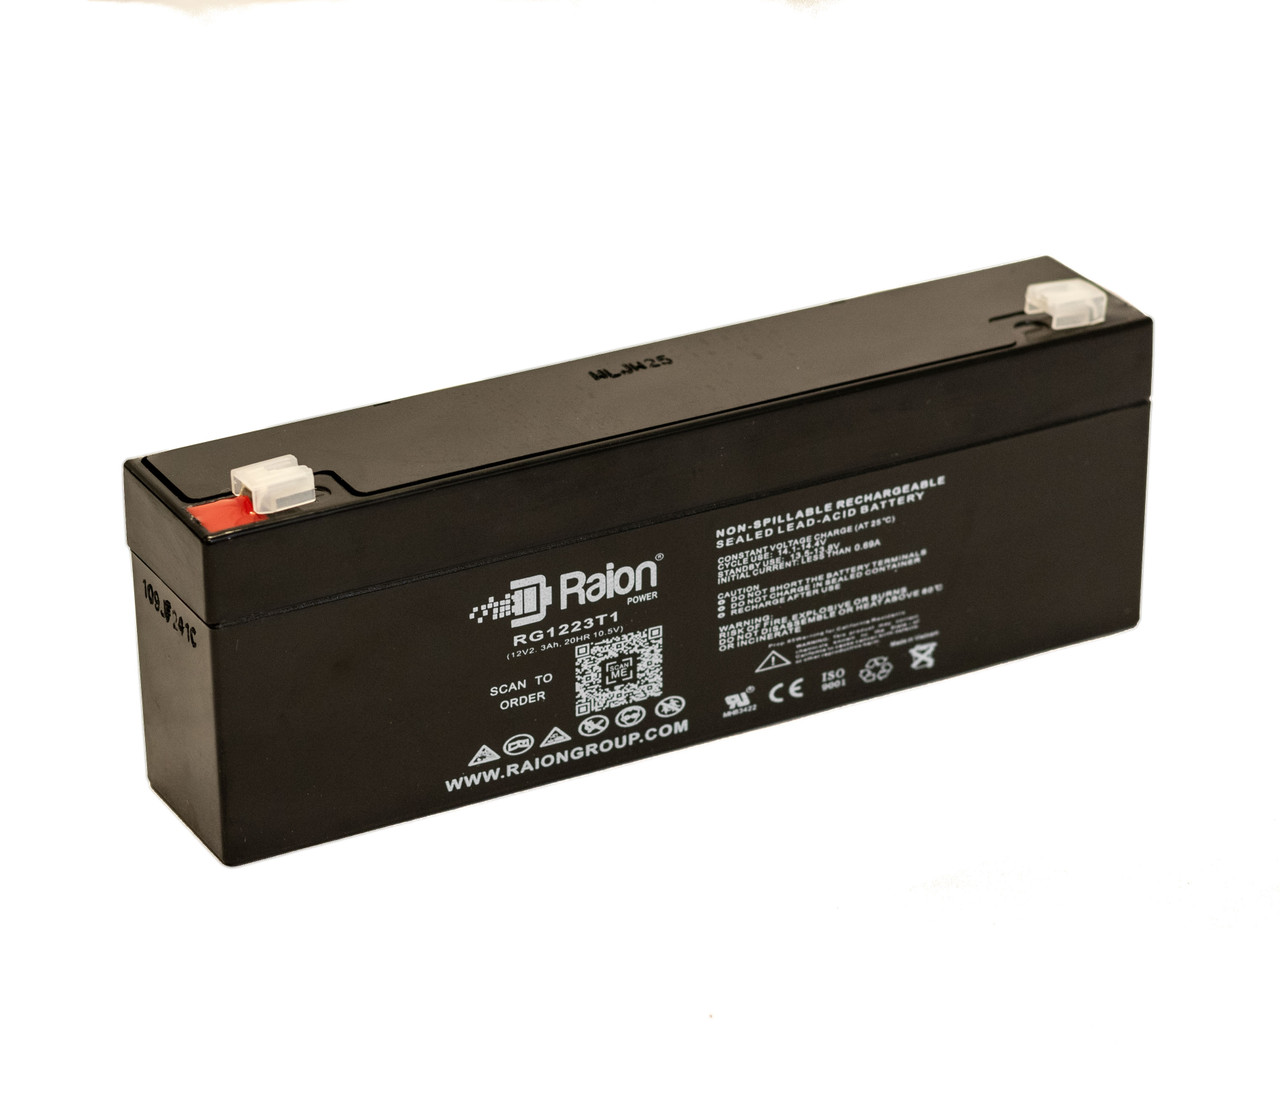 Raion Power RG1223T1 Replacement Battery for R&d 5515